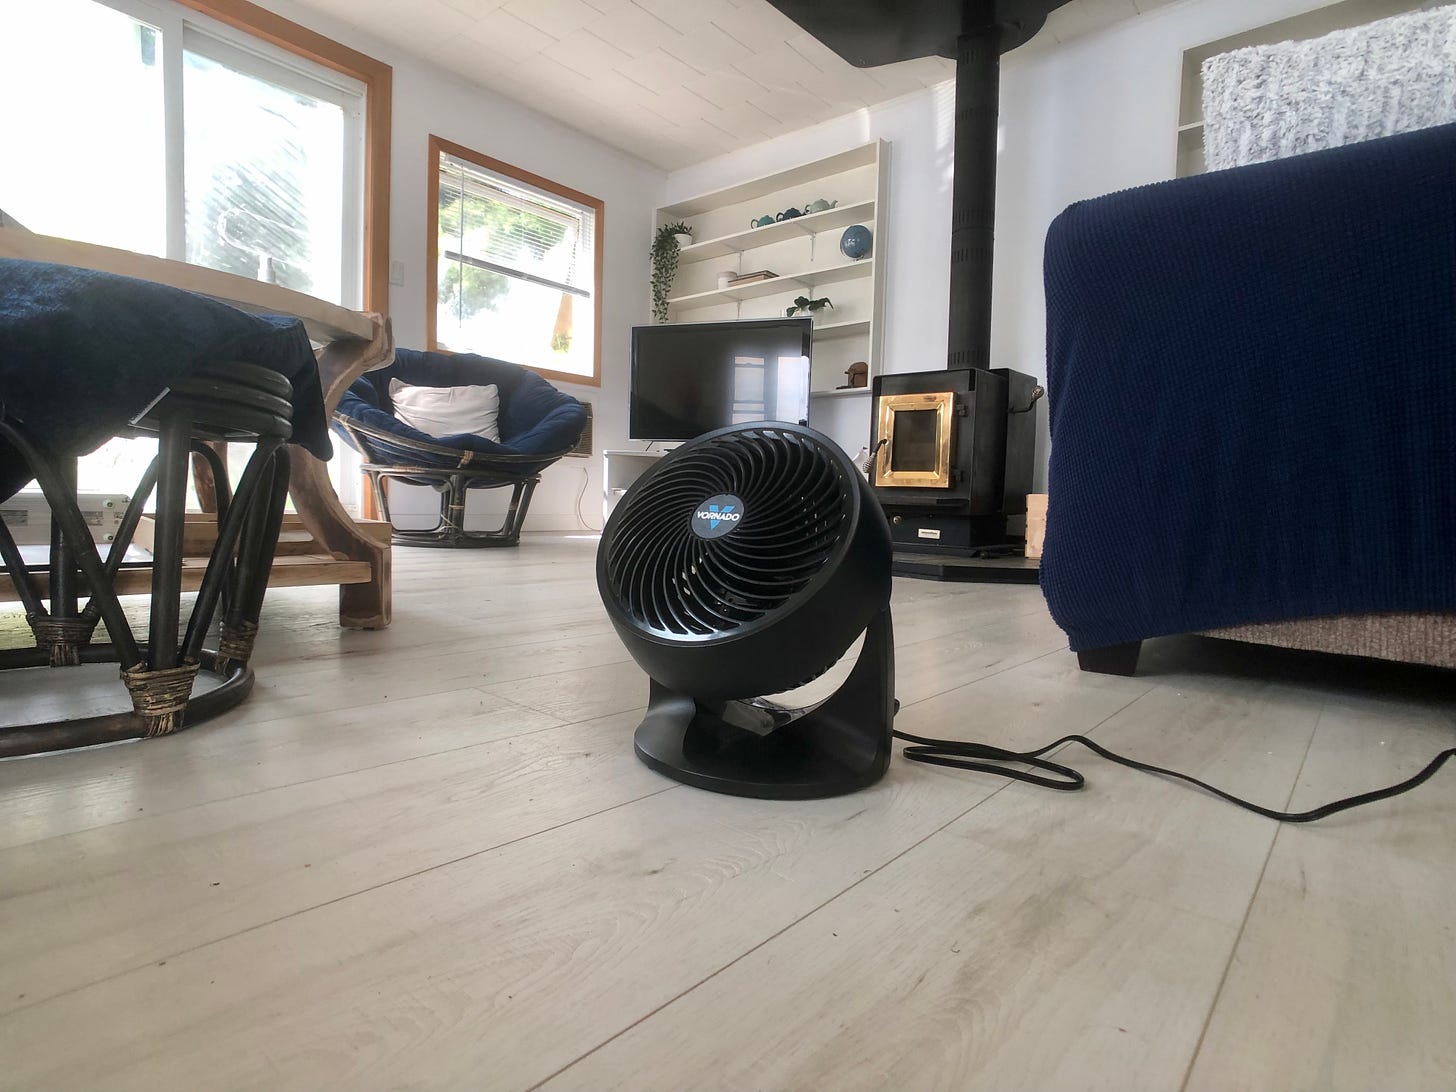 An electric fan on the floor of a cottage living room.